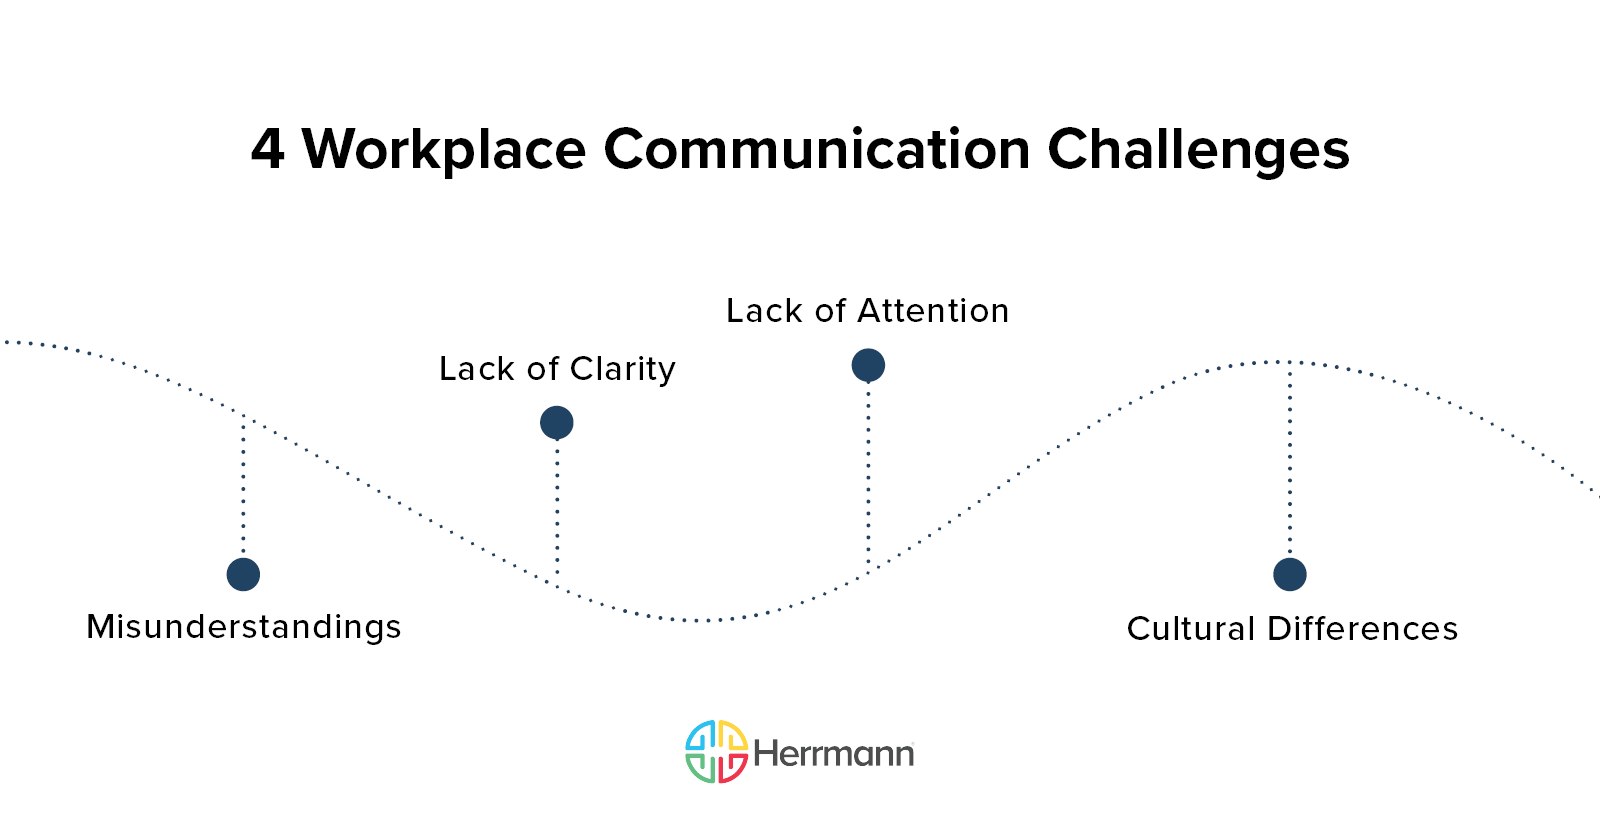 4 workplace communication challenges: Misunderstandings, Lack of Clarity, Lack of Attention, Cultural Differences